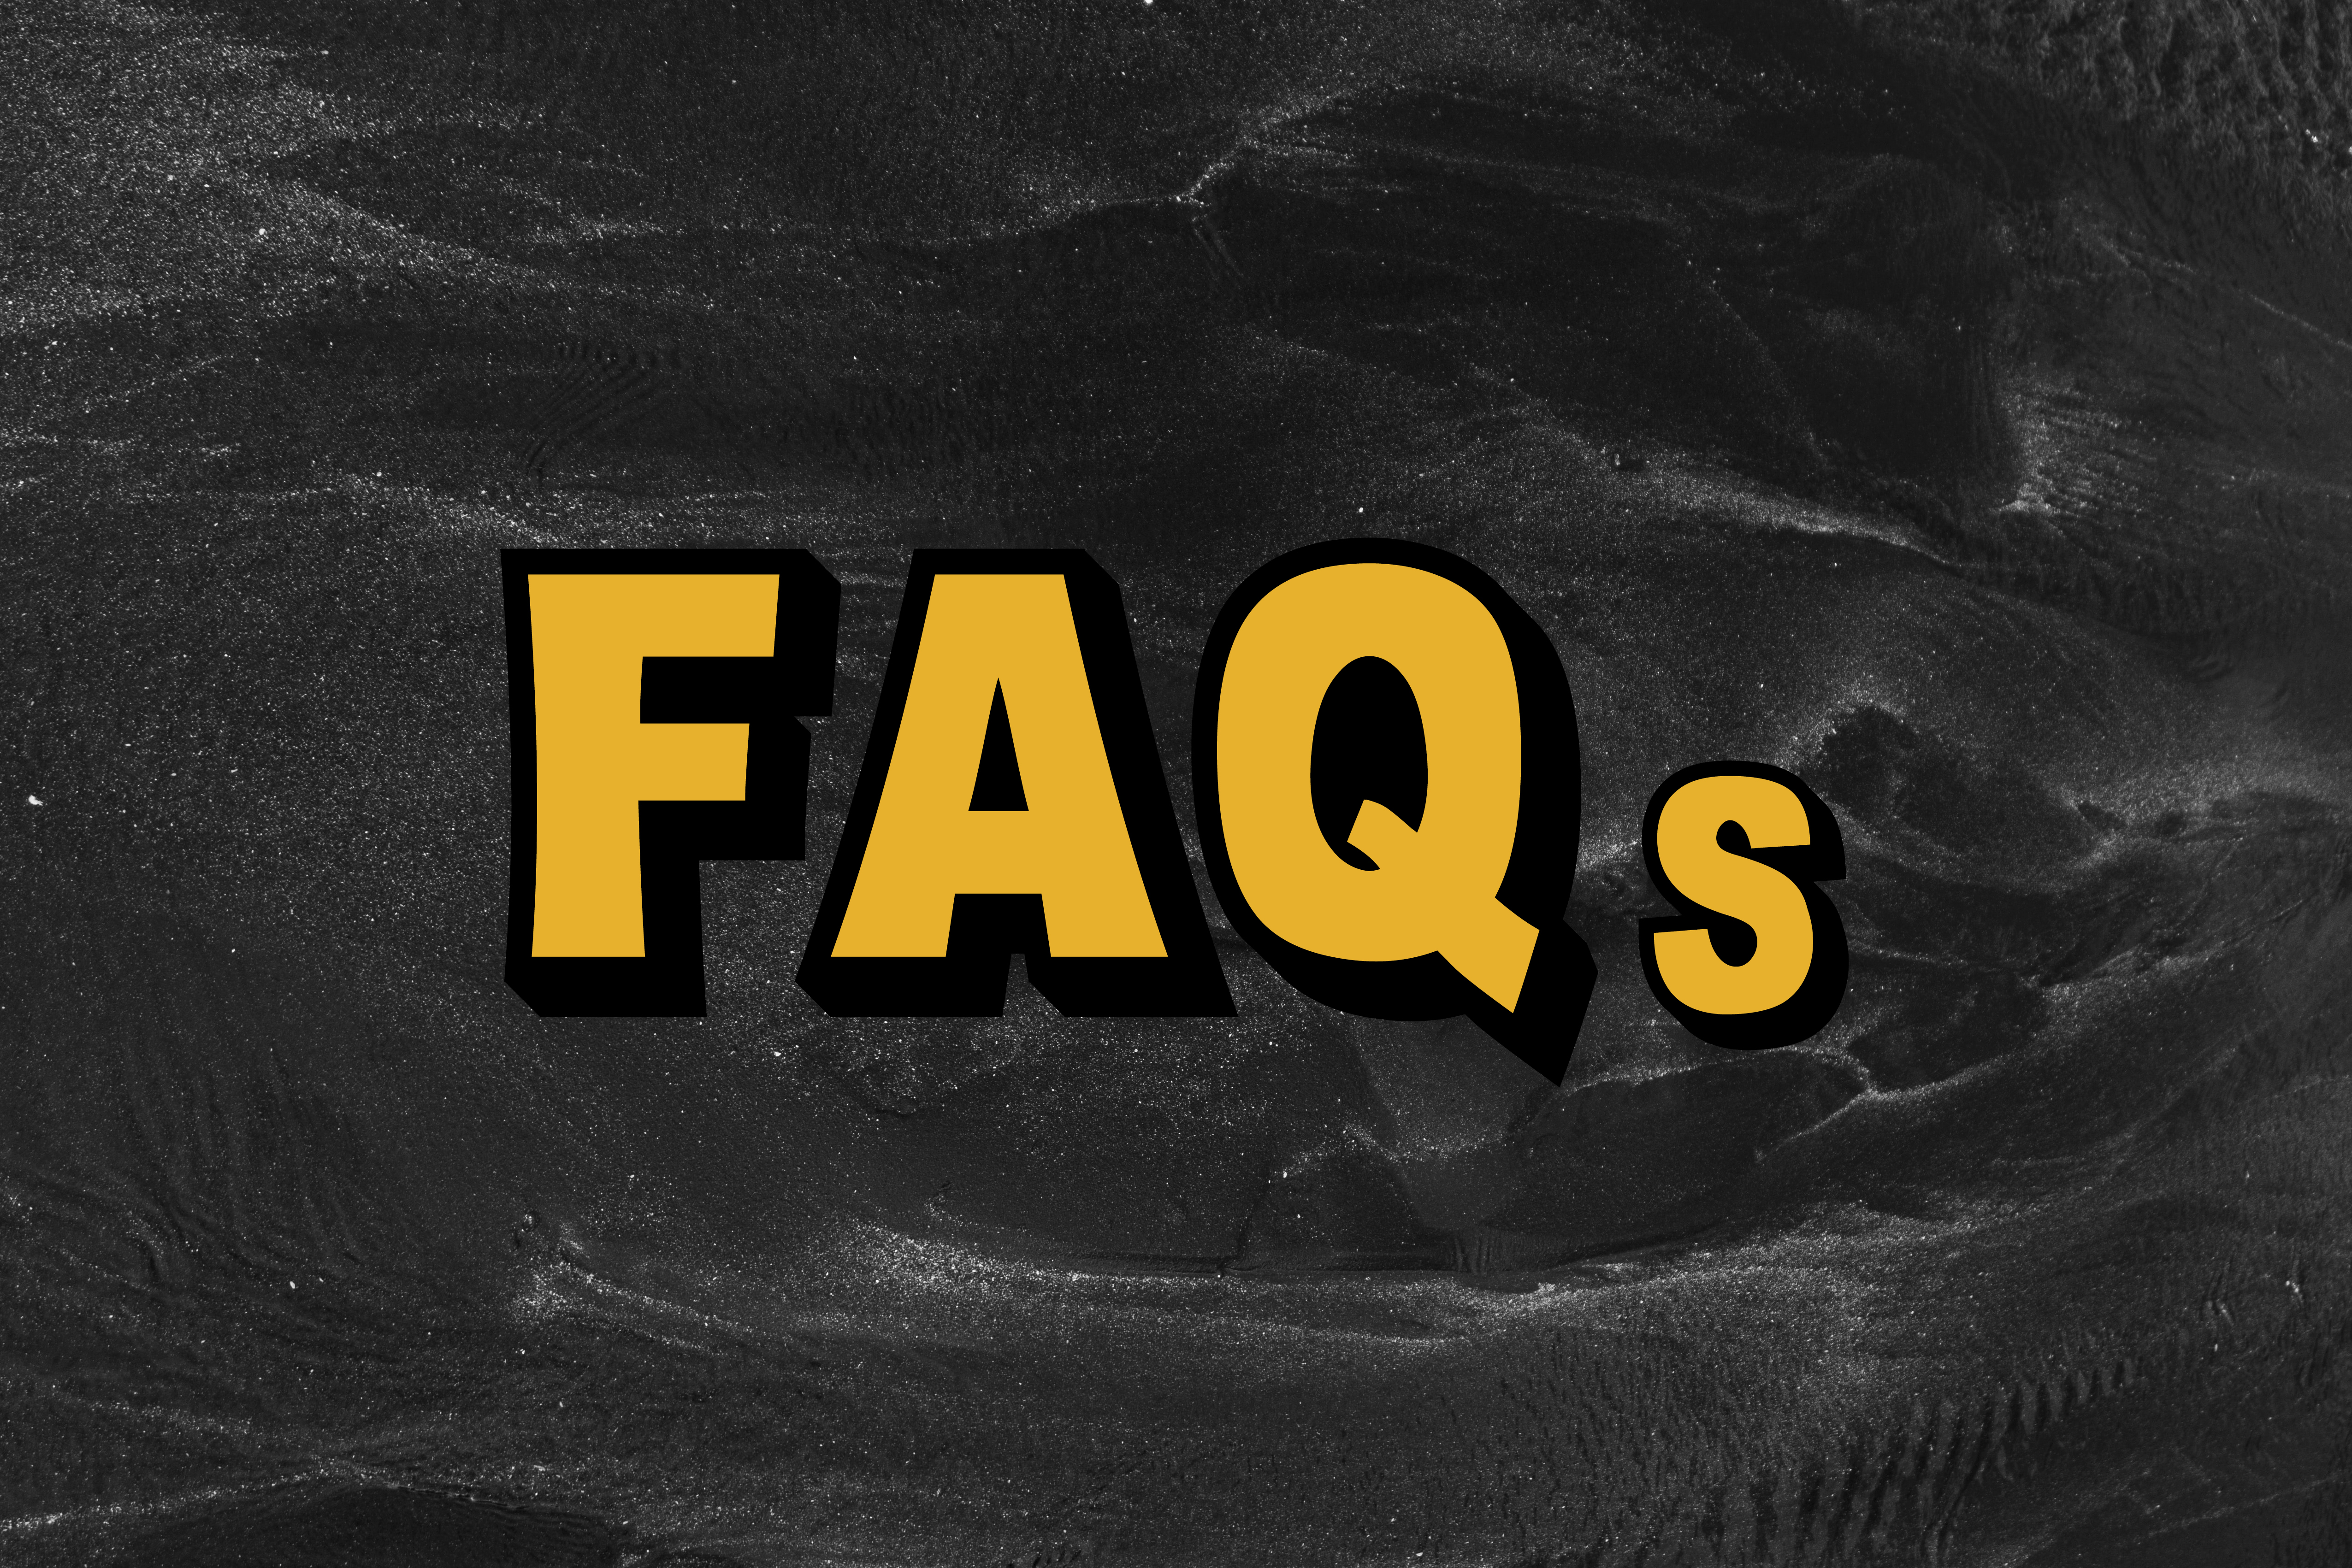 The word FAQs in block yellow writing on a swirly black and white backgroud.